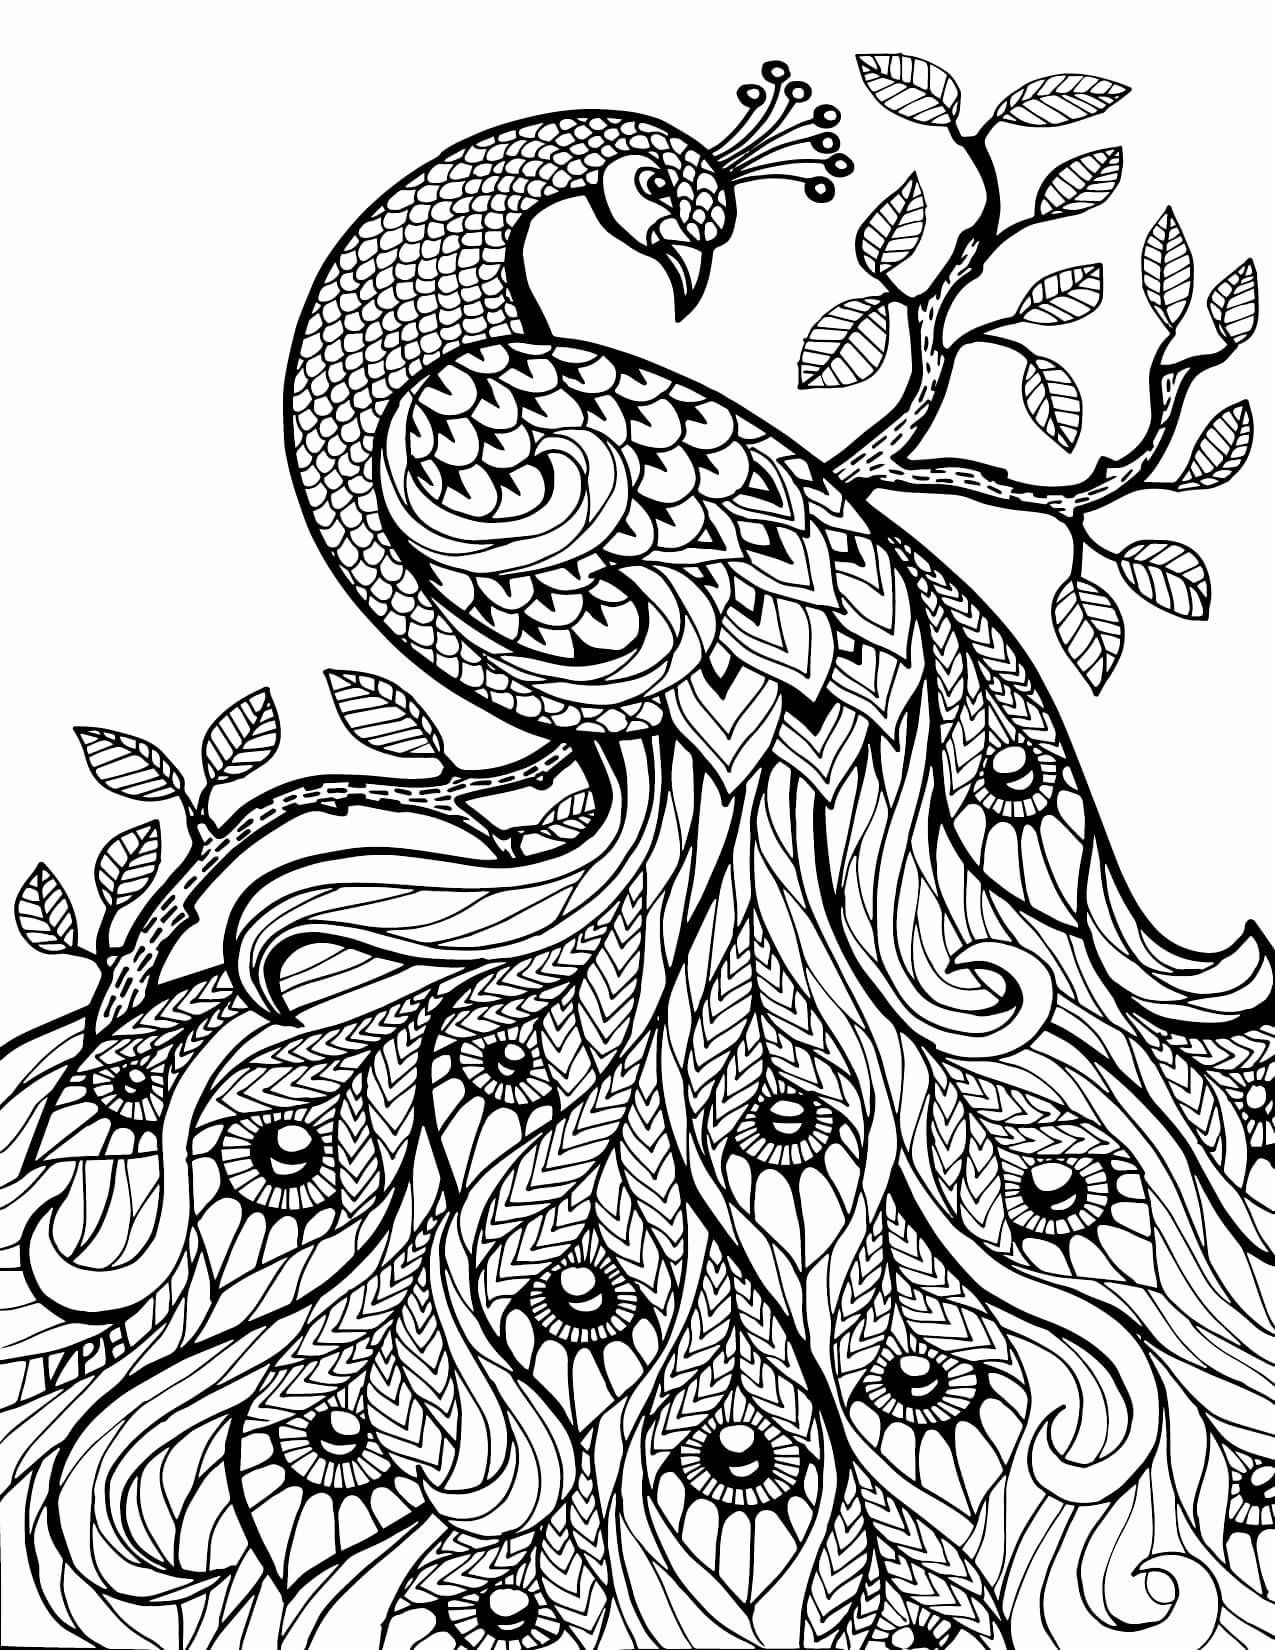 Pin on Best Animal Coloring Pages